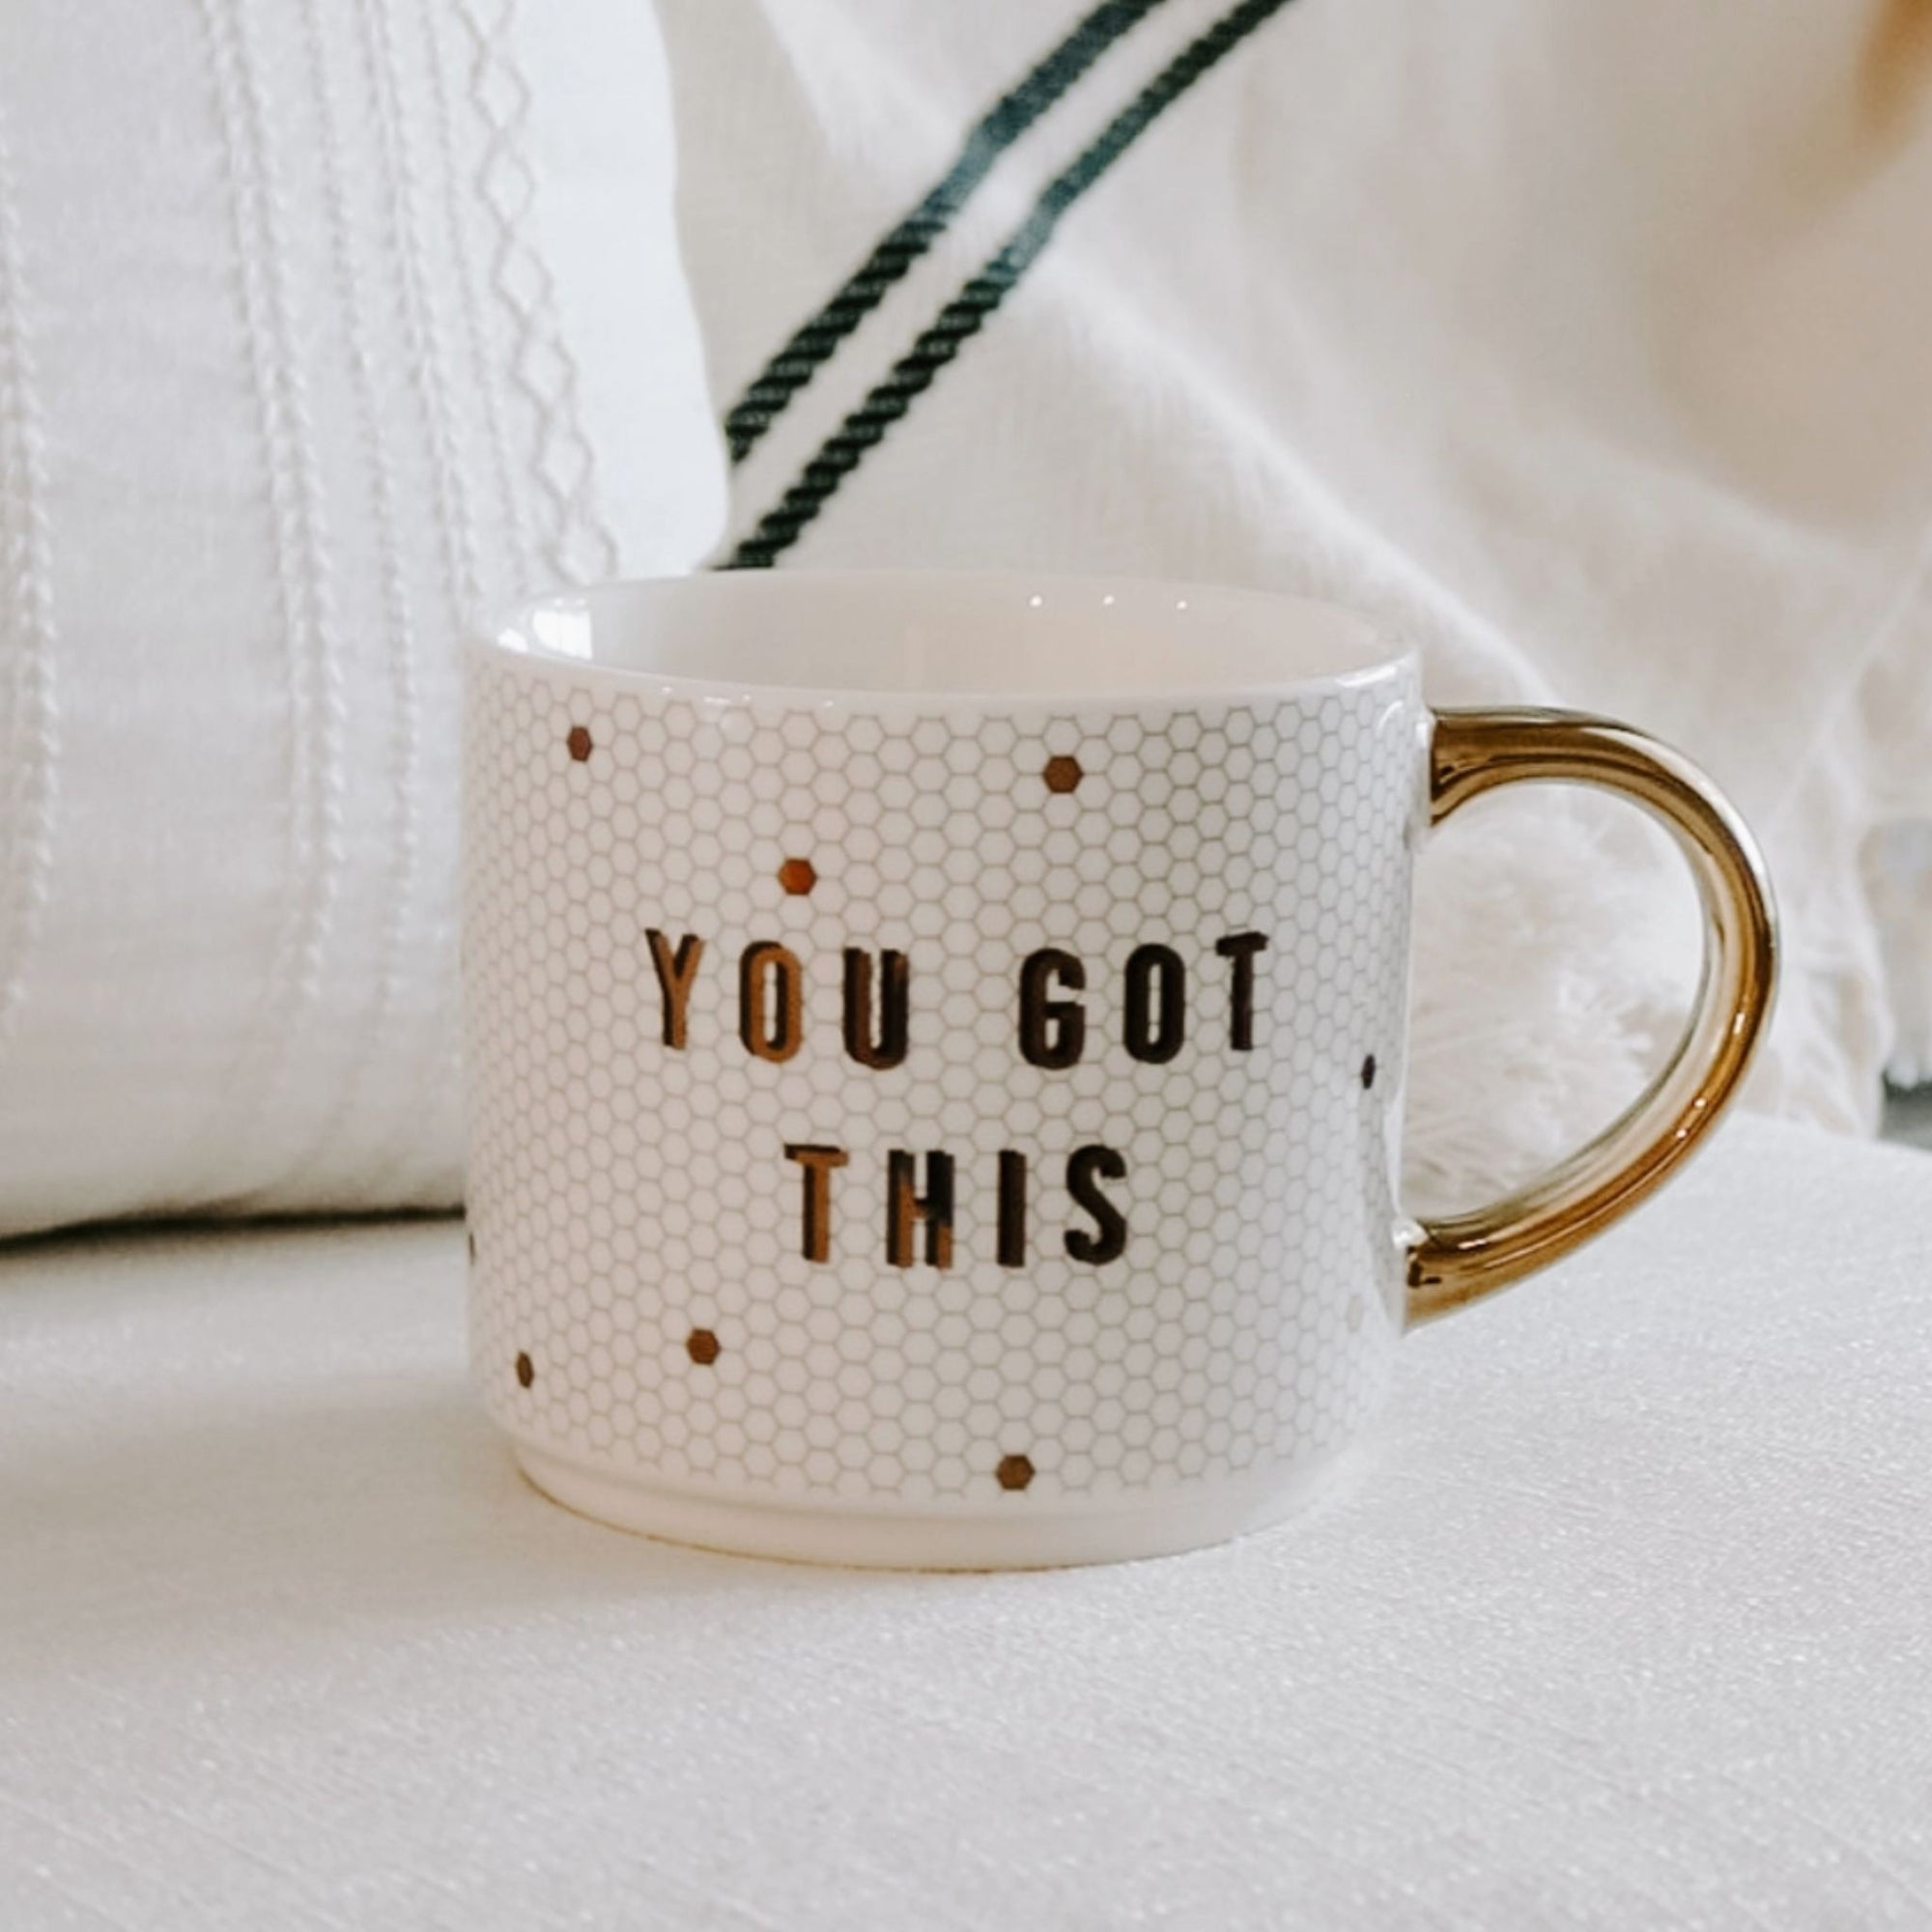 https://cdn.shopify.com/s/files/1/0464/2353/9862/products/YouGotthis.jpg?v=1662495895&width=2000